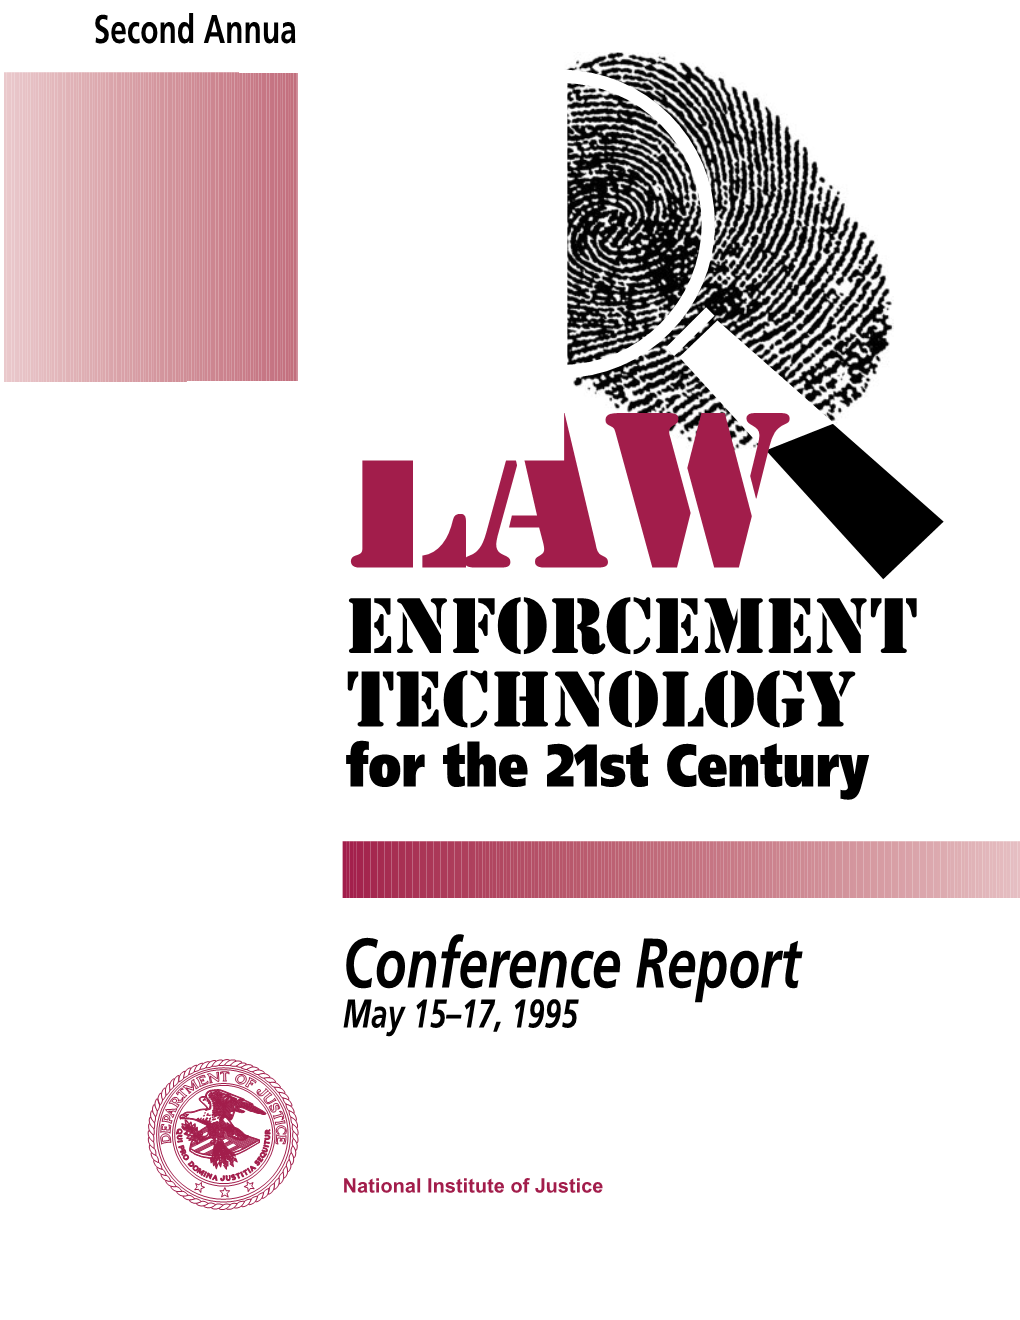 Second Annual Conference on Law Enforcement Technology for the 21St Century